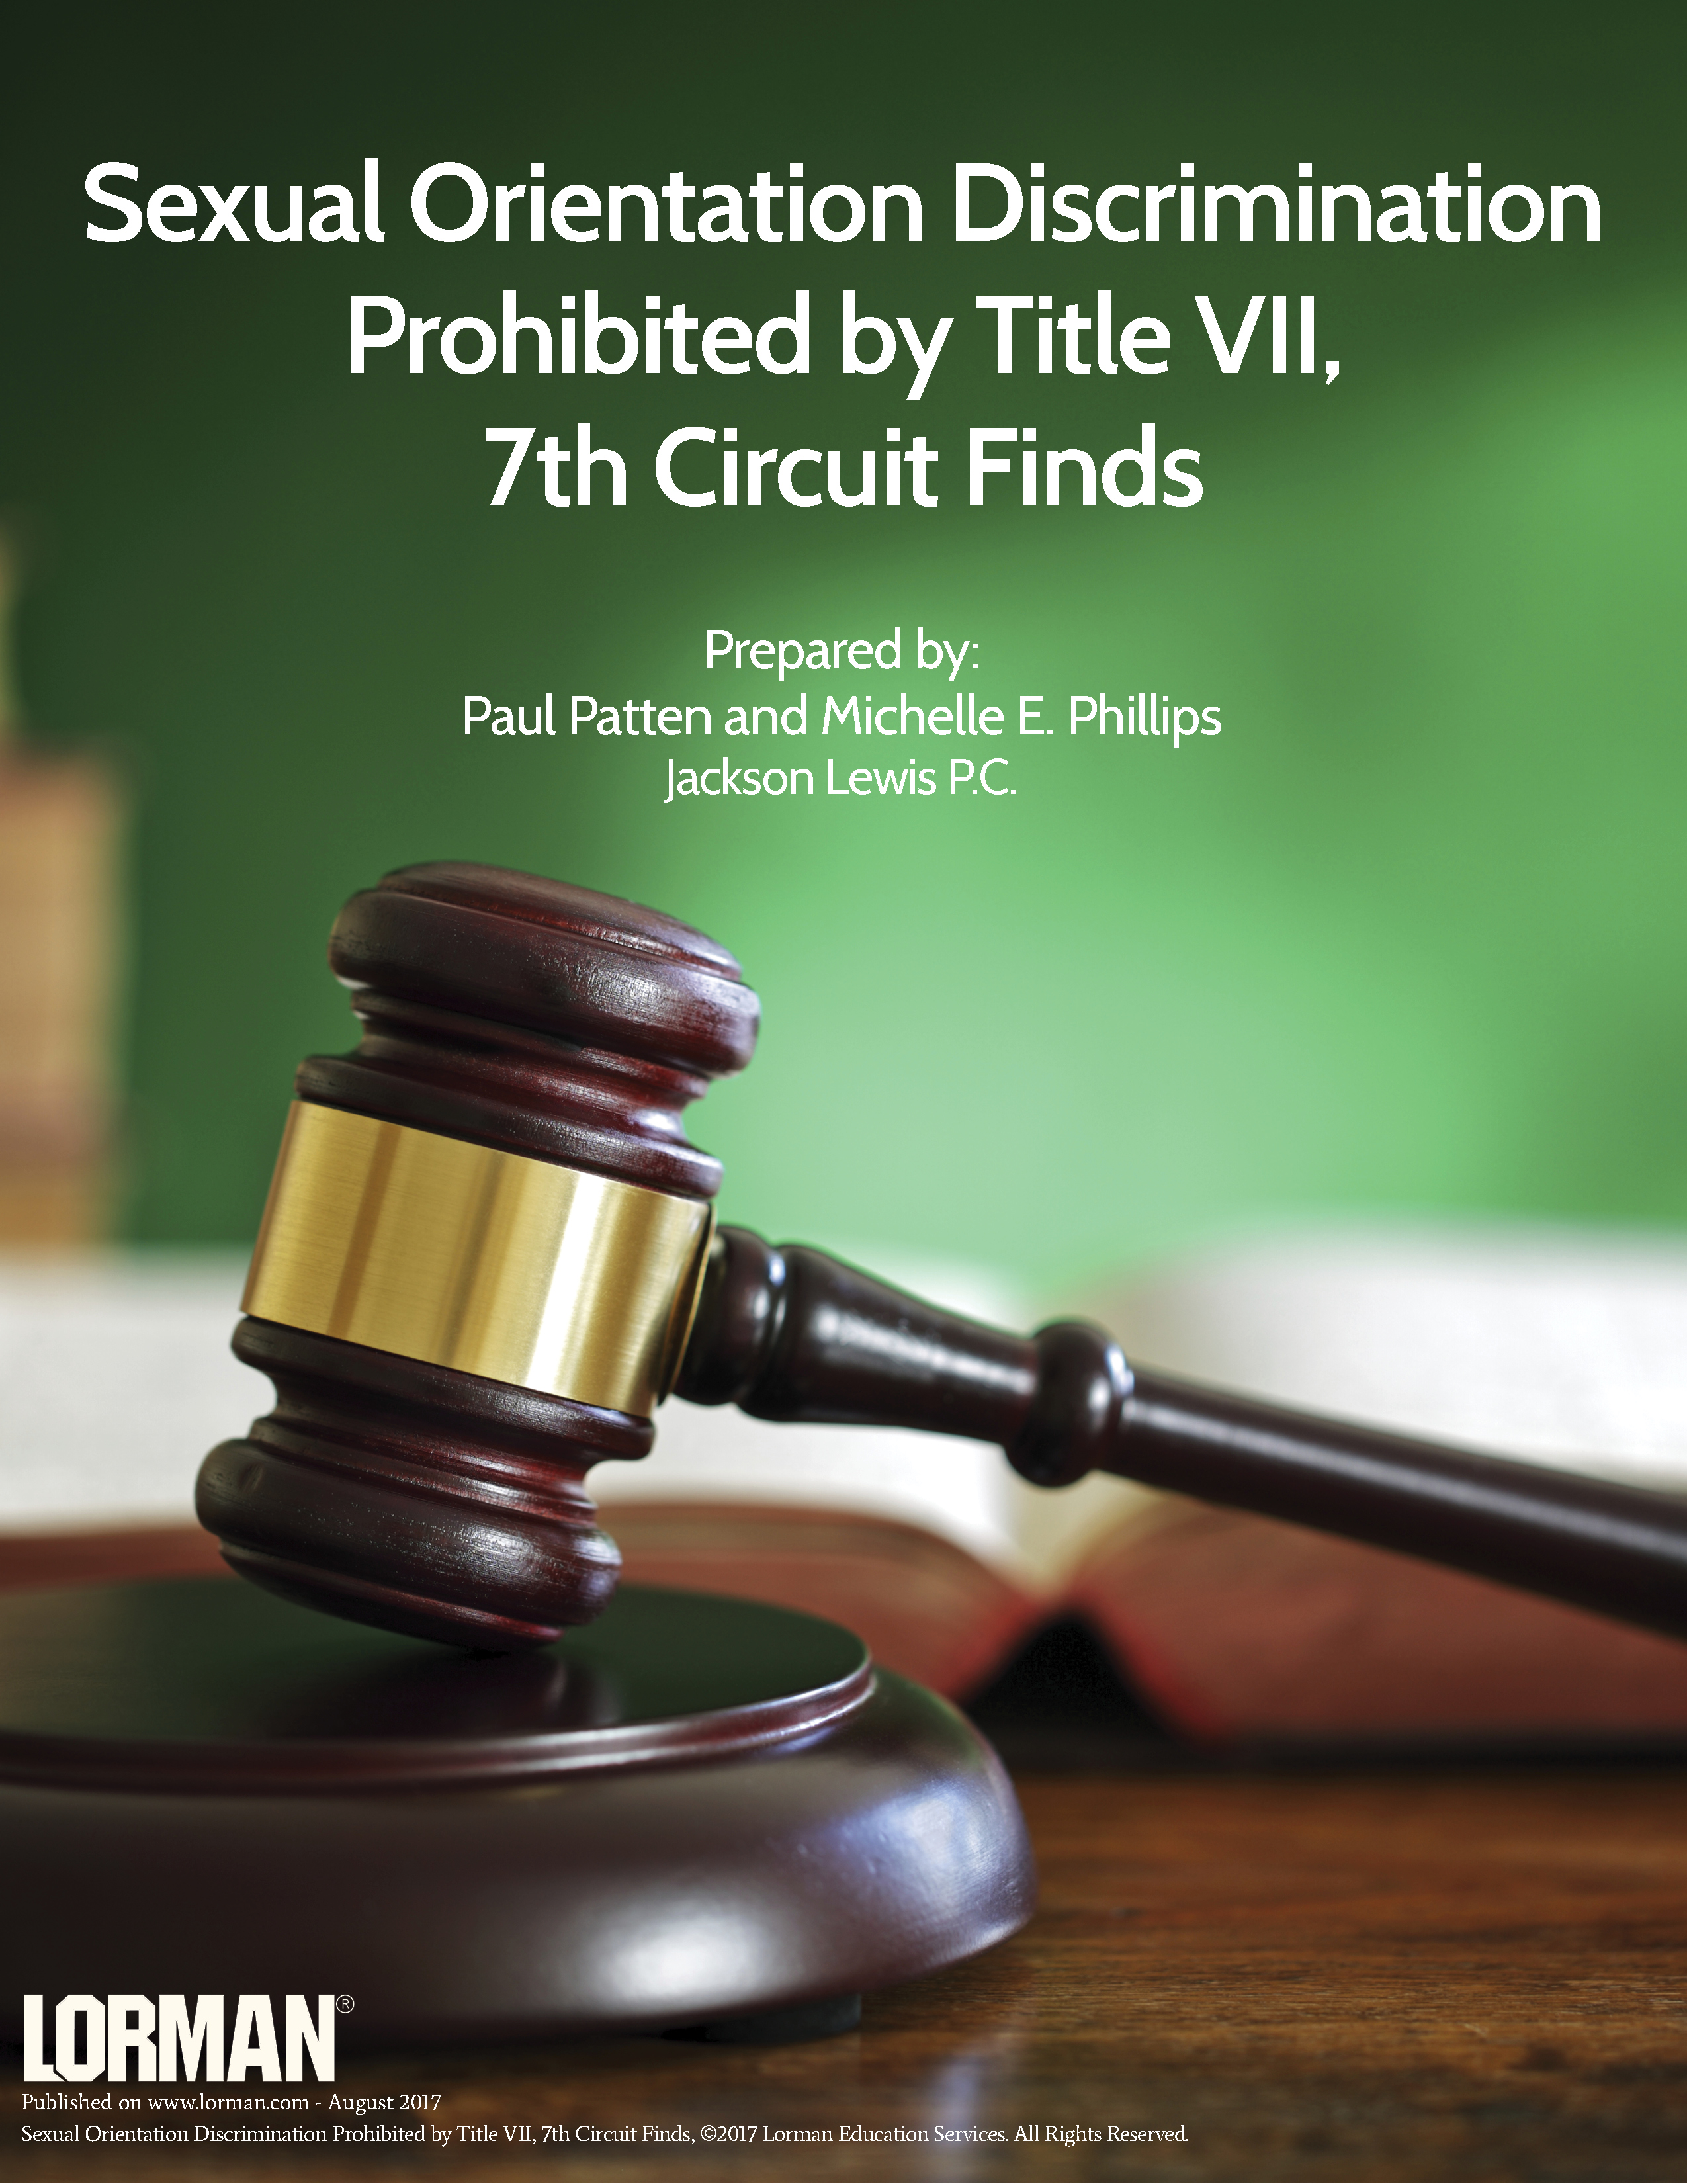 Sexual Orientation Discrimination Prohibited by Title VII, 7th Circuit Finds